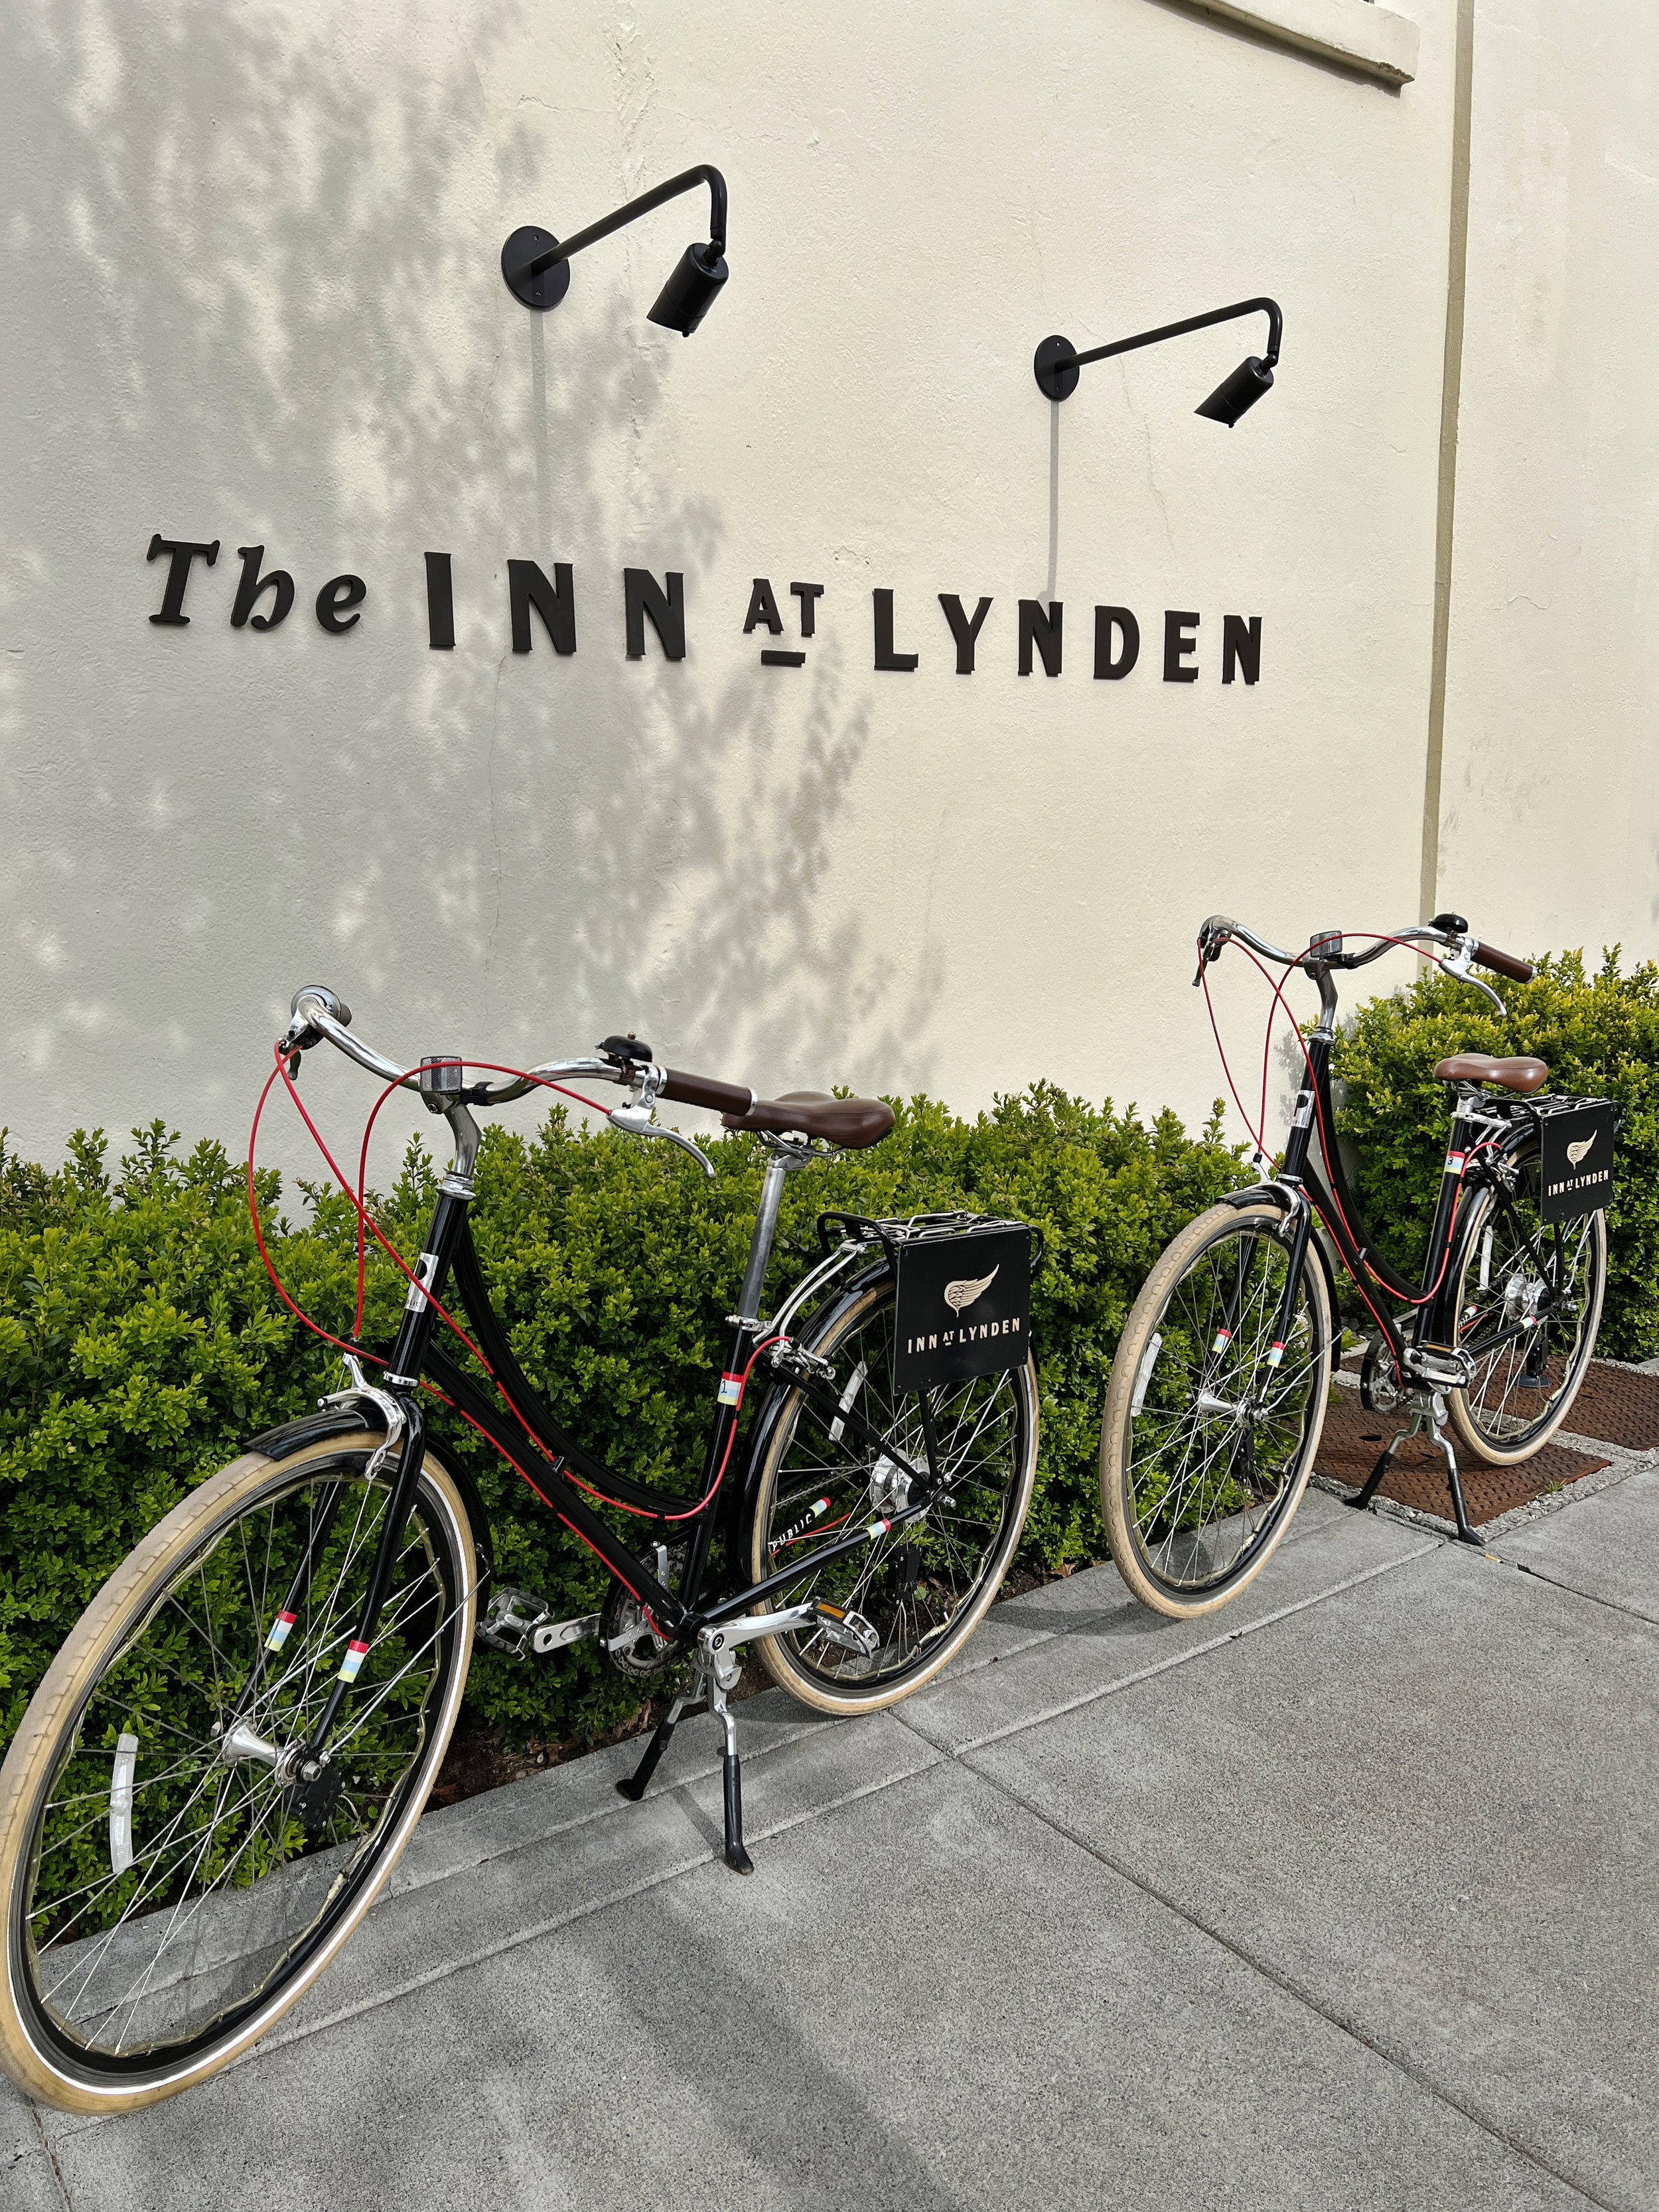 Free bike usage for guests at the Inn at Lynden